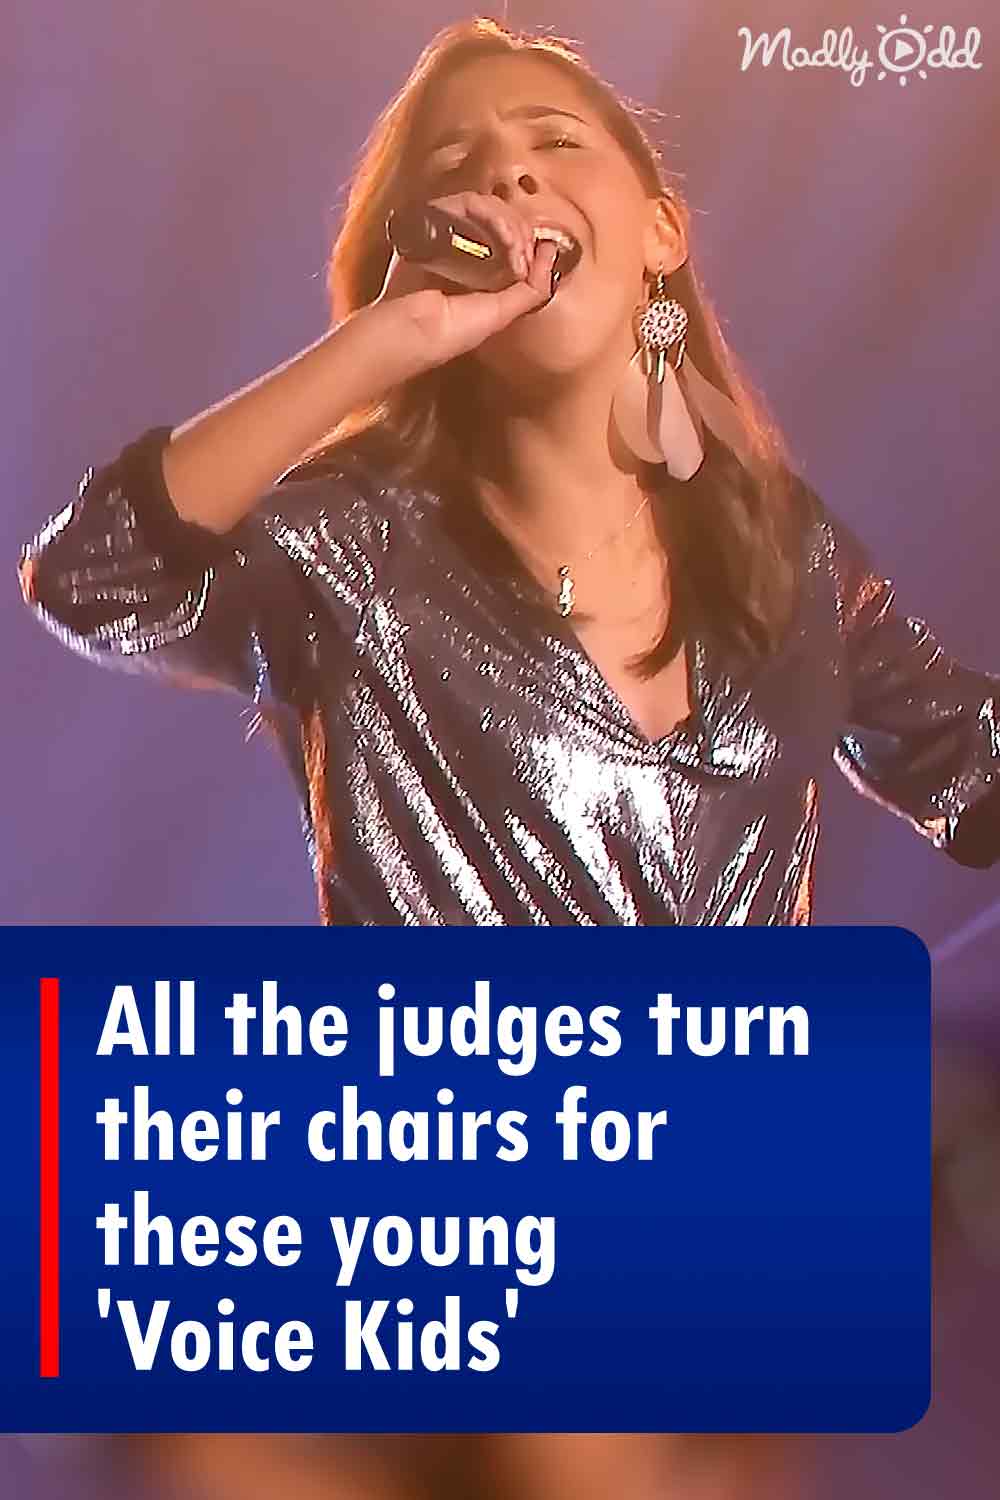 All the judges turn their chairs for these young \'Voice Kids\'